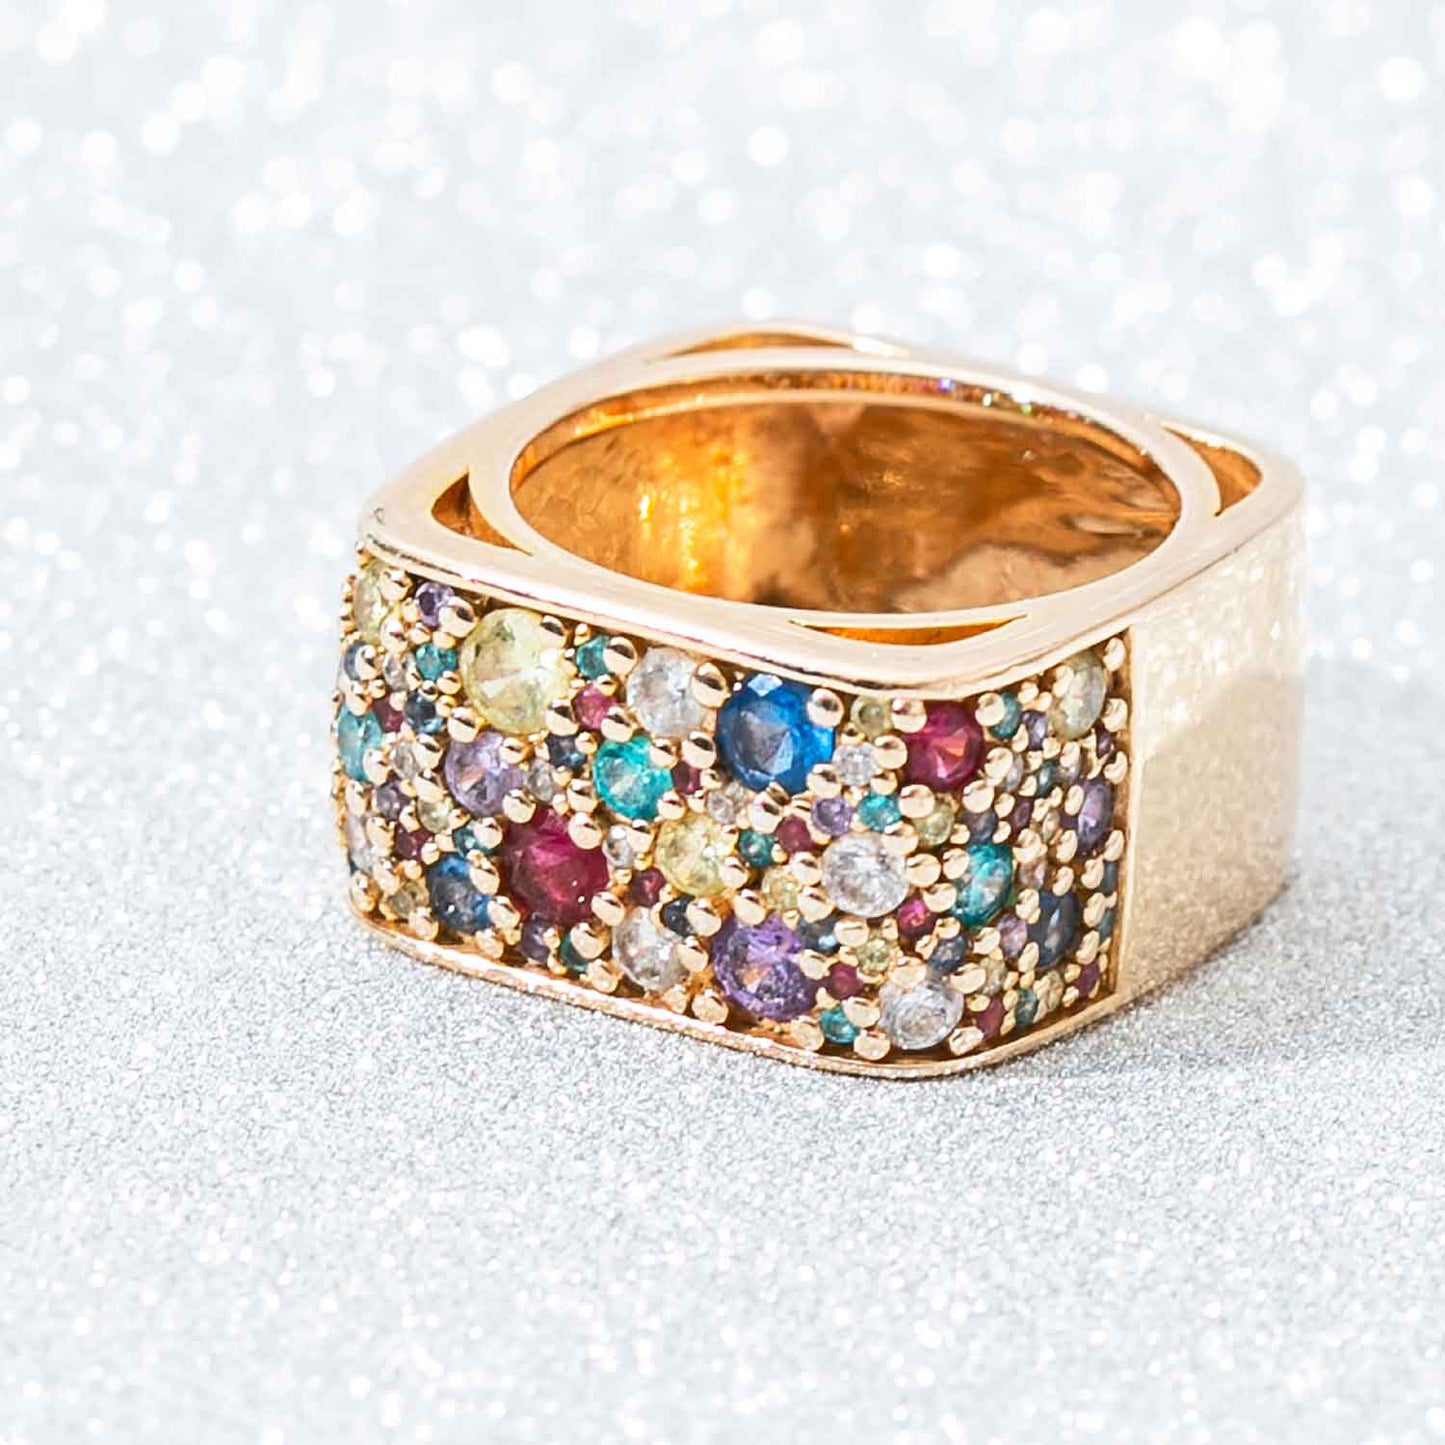 Sif Jakobs Novara Quadrato Ring - 18ct Gold Plated Sterling Silver with Multicoloured Zirconia - Size Q